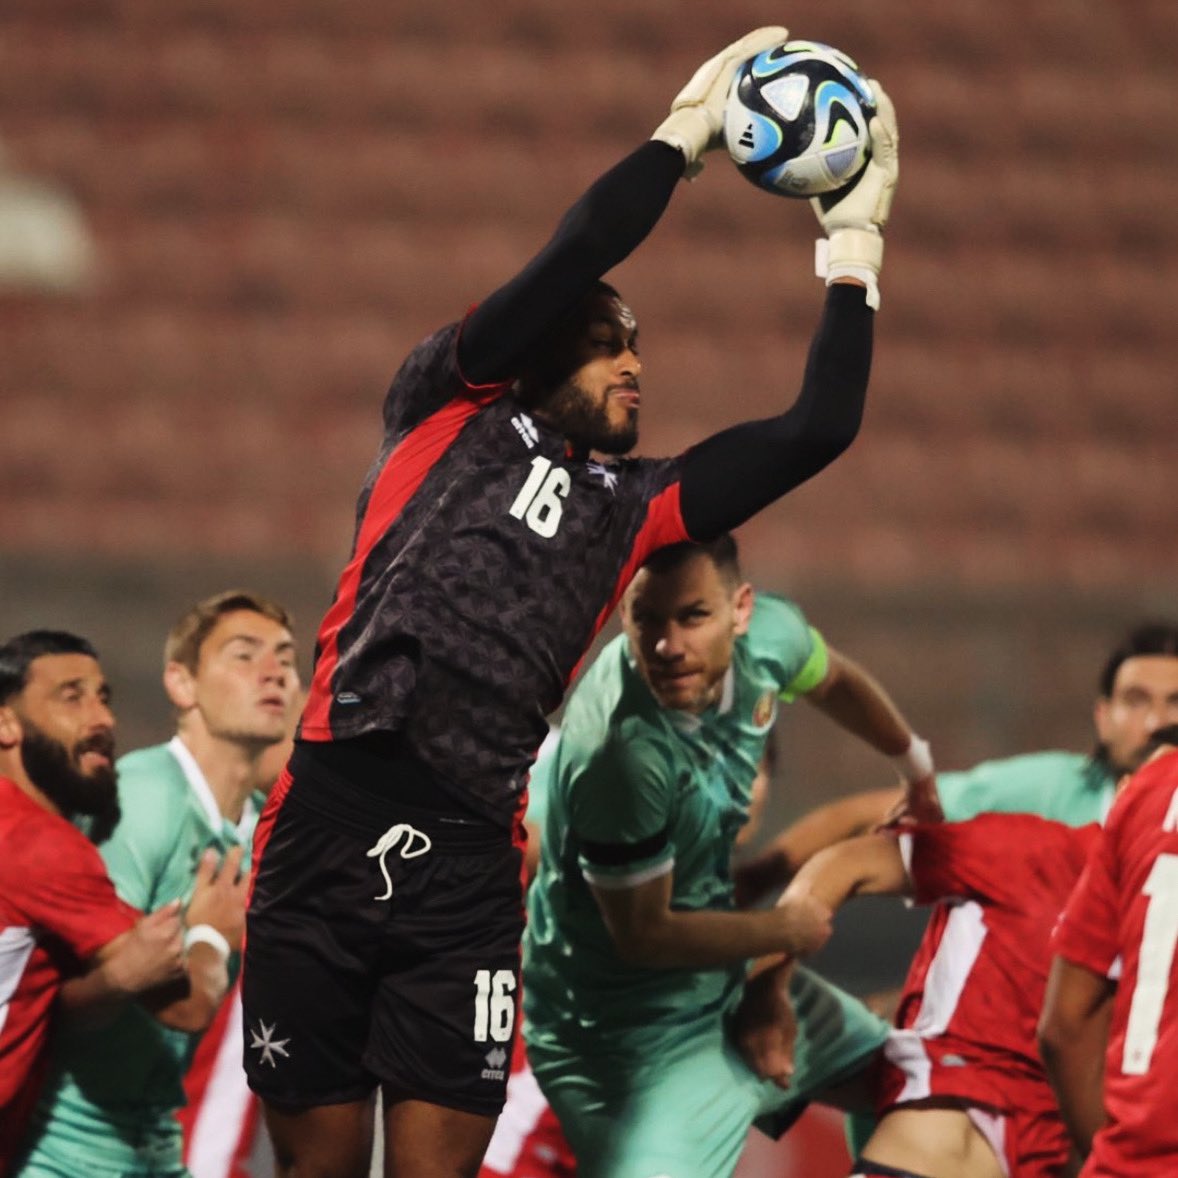 Congratulations to Rashed Al Tumi for making his international debut for @MaltaFA1900 this evening. Well deserved! 👏🏻🆎🧤 #internationalfootball #debut #gk